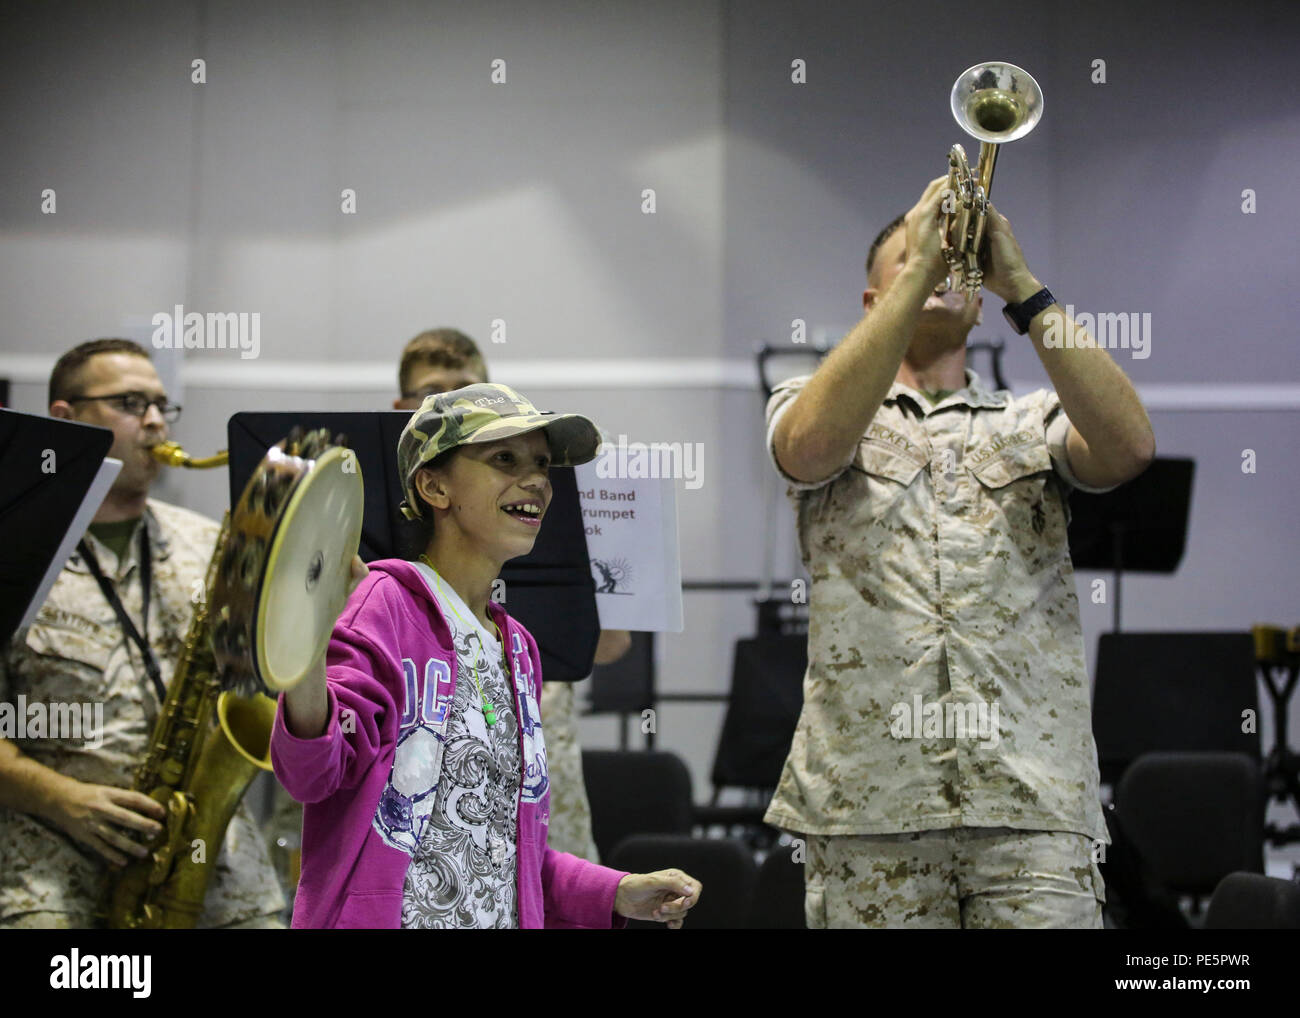 Amber N. Carter, a resident of Hubert, N.C., plays music alongside the 2nd Marine Division Band during her visit to the band’s command post at Camp Lejeune, N.C., Sept. 29, 2015. Amber always dreamed of joining the Marine Corps, but could not due to William’s syndrome. Staff Sgt. Isaiah Riley, a mess chief with 10th Marine Regiment, brought her and her family aboard the base to watch the band play. (U.S. Marine Corps photo by Cpl. Paul S. Martinez/Released) Stock Photo